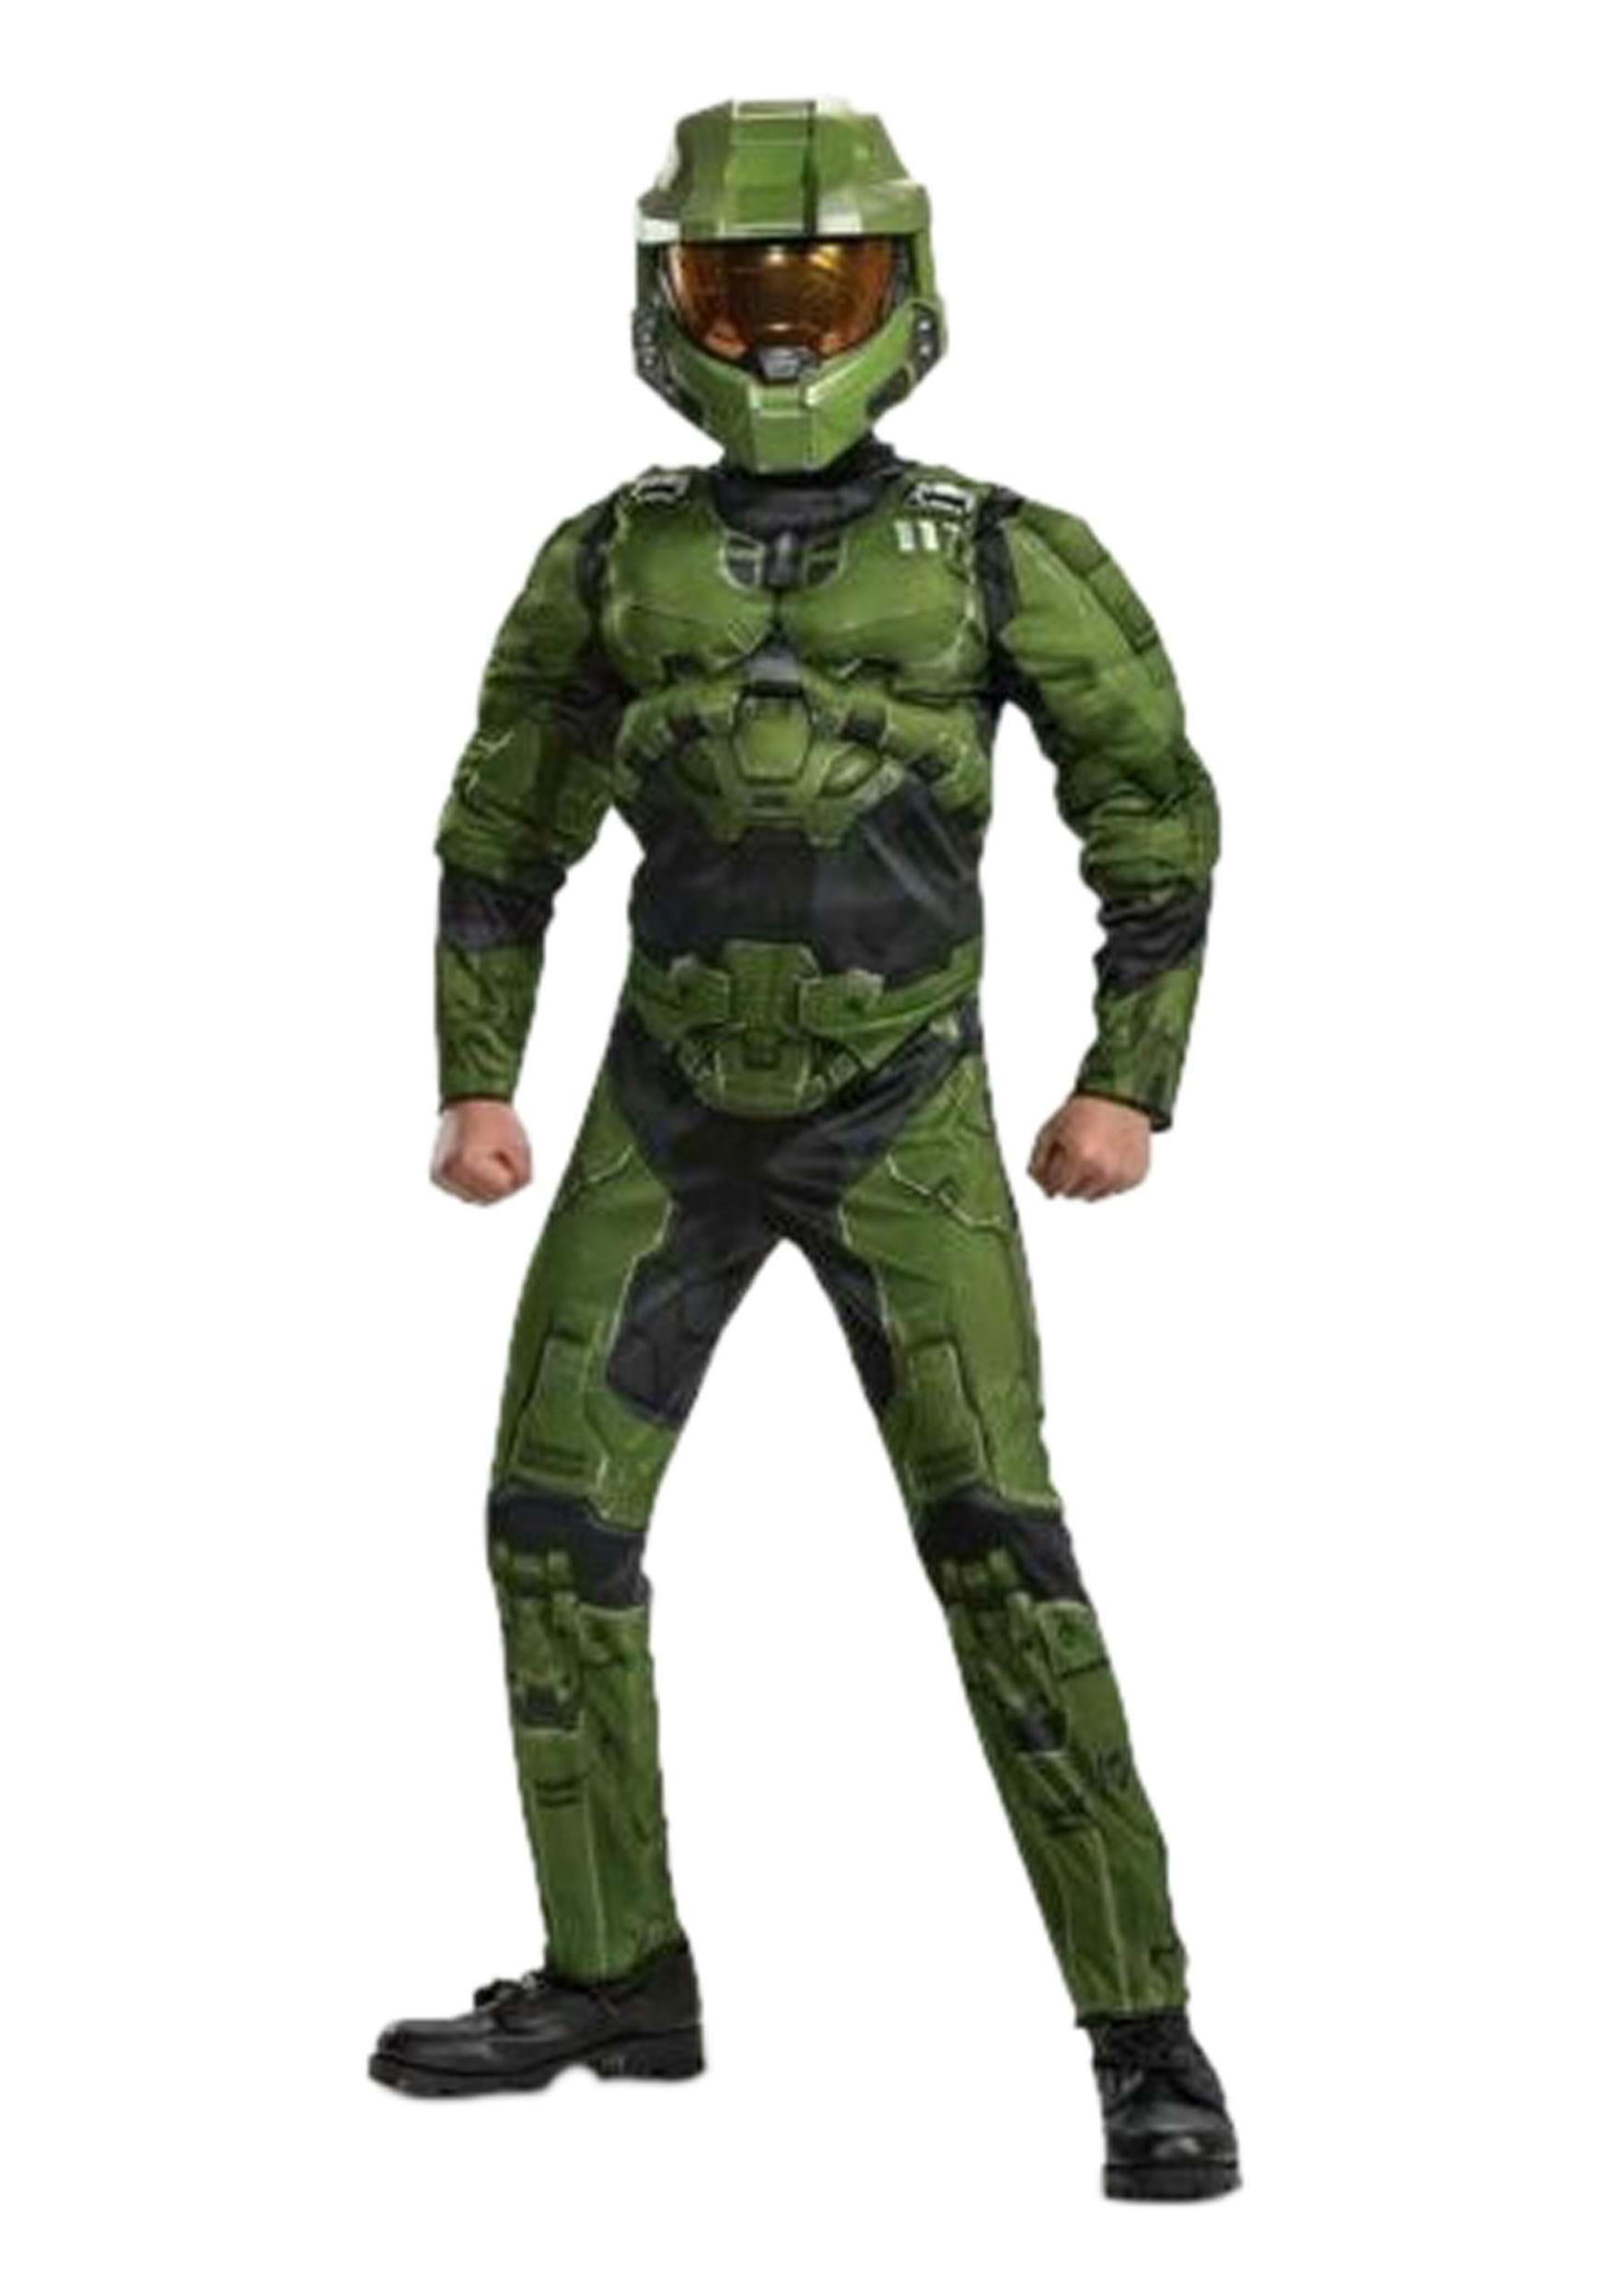 Disguise Kids Halo Master Chief Costume | Video Games Costumes